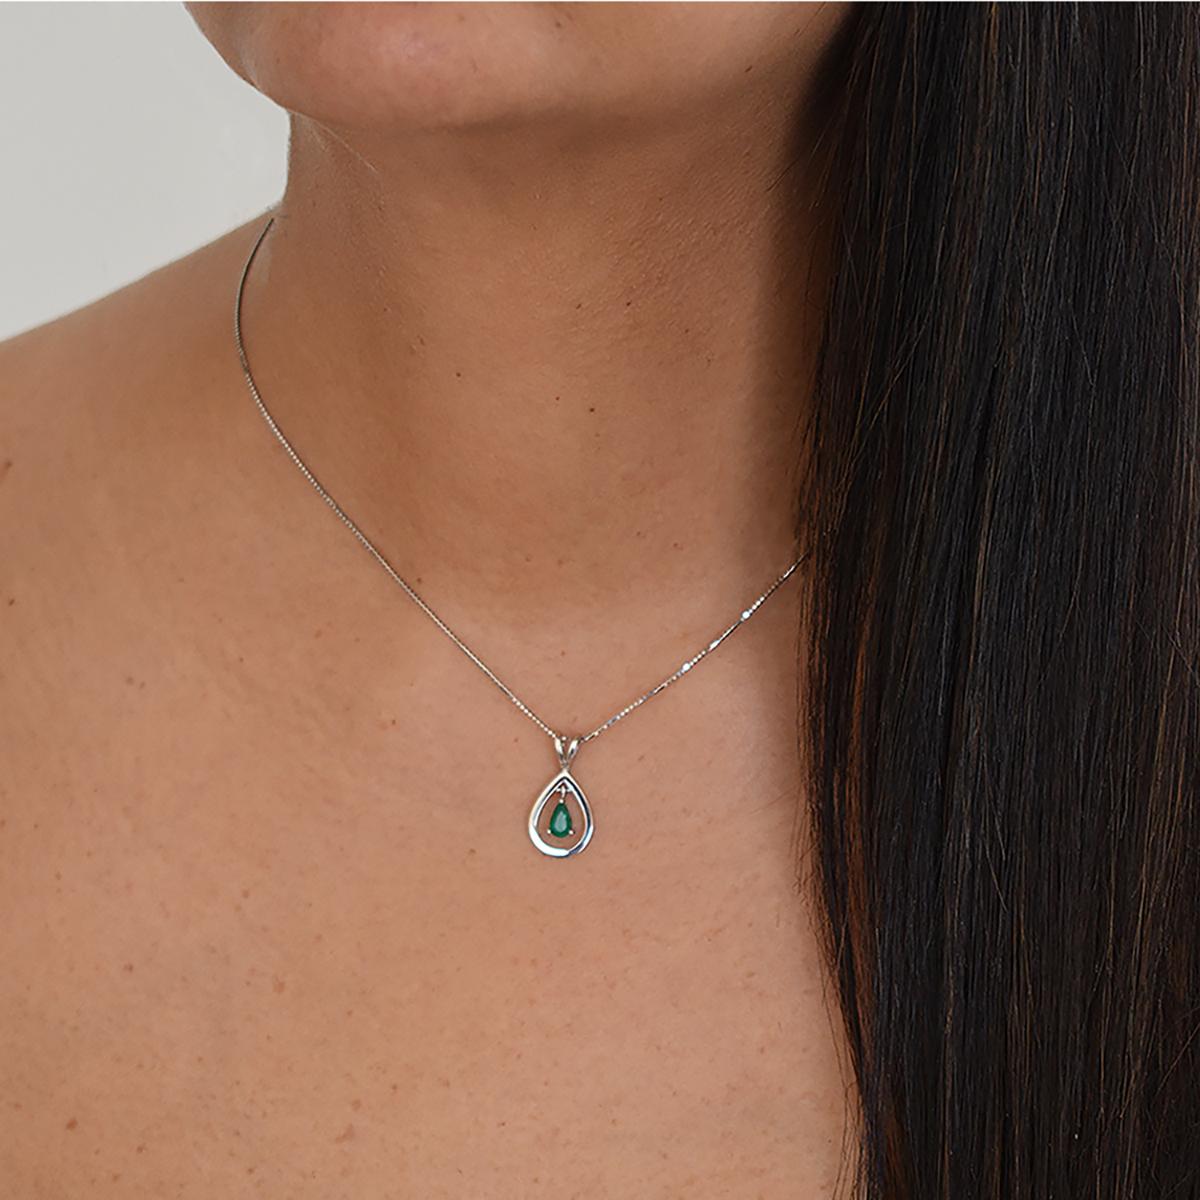 The beautiful quality of this pear shape natural Colombian emerald creates a vibrant green color full of life that stands up and is the center of attention of this fabulous pendant. The emerald is beautifully set in a fine and delicate 18K white